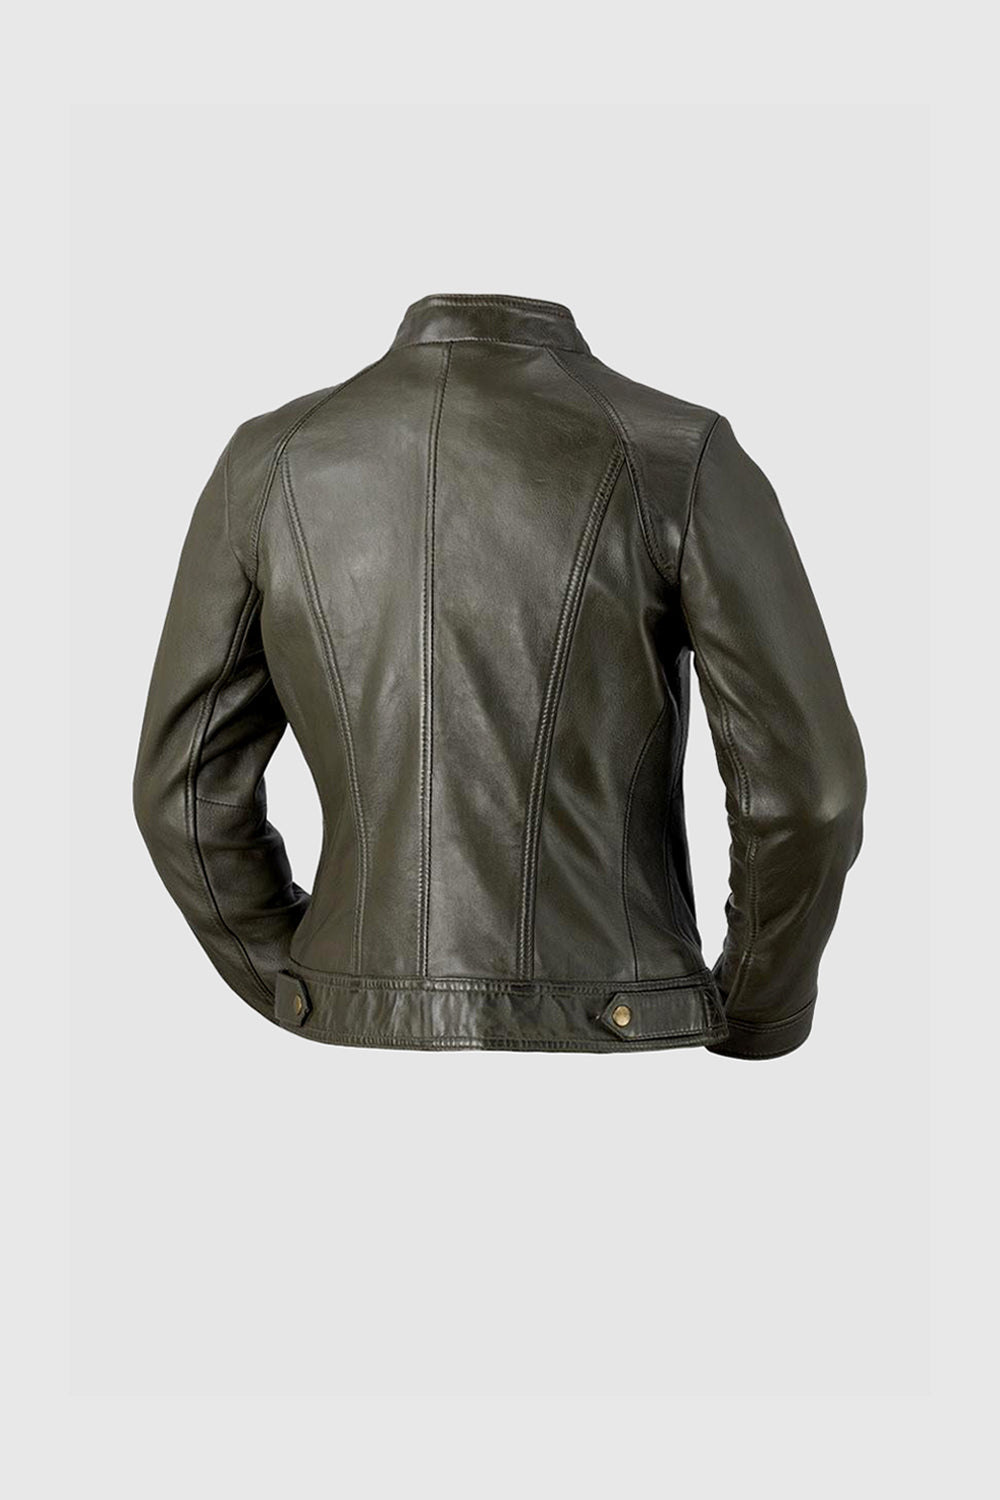 Favorite Womens Fashion Leather Jacket Army Green